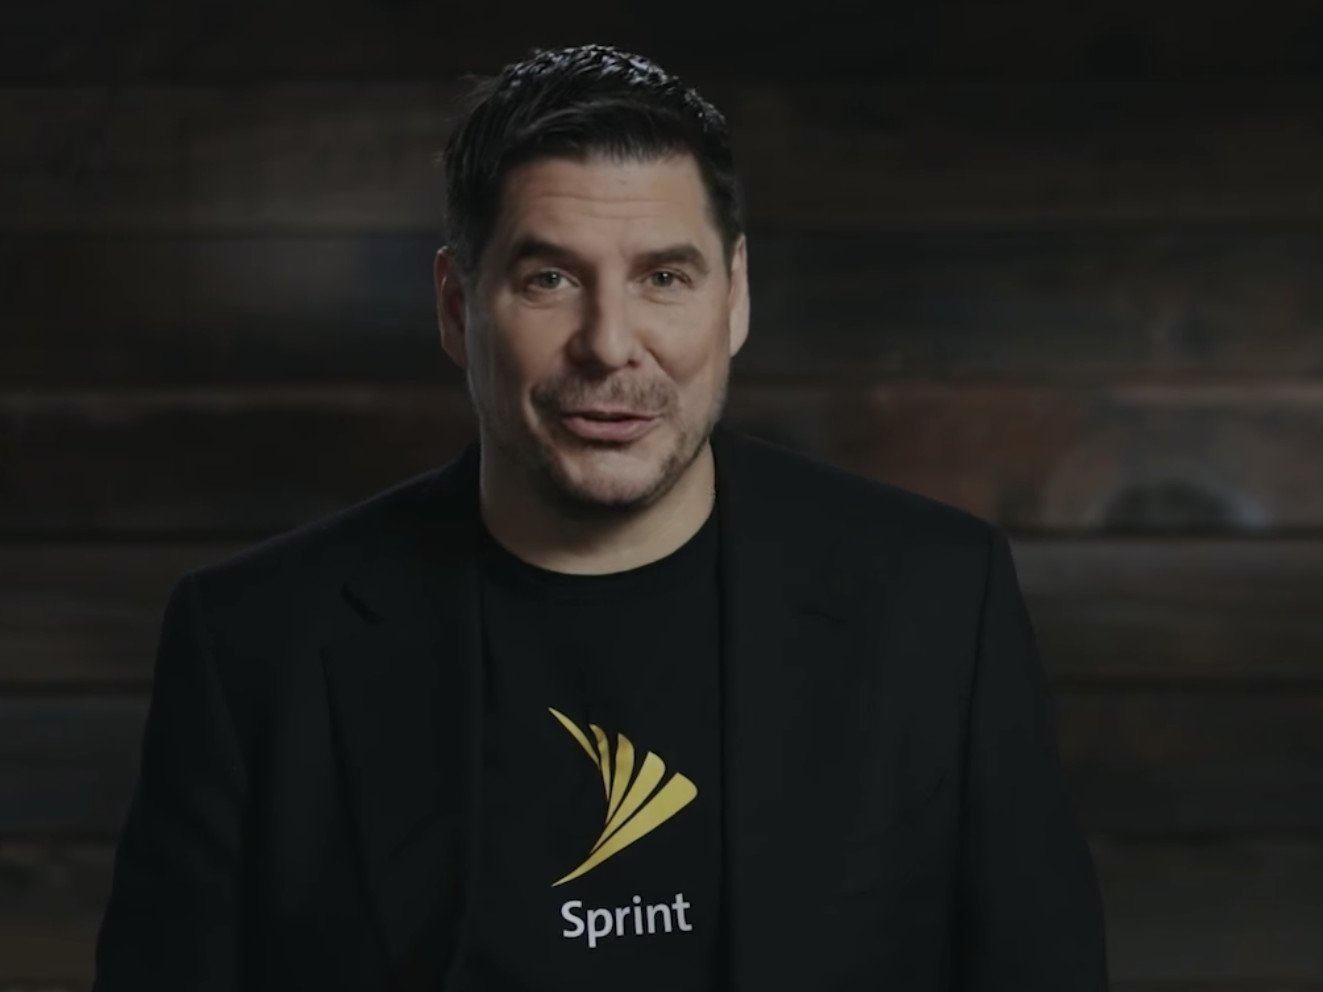 Marcelo Claure is no longer the CEO of Sprint